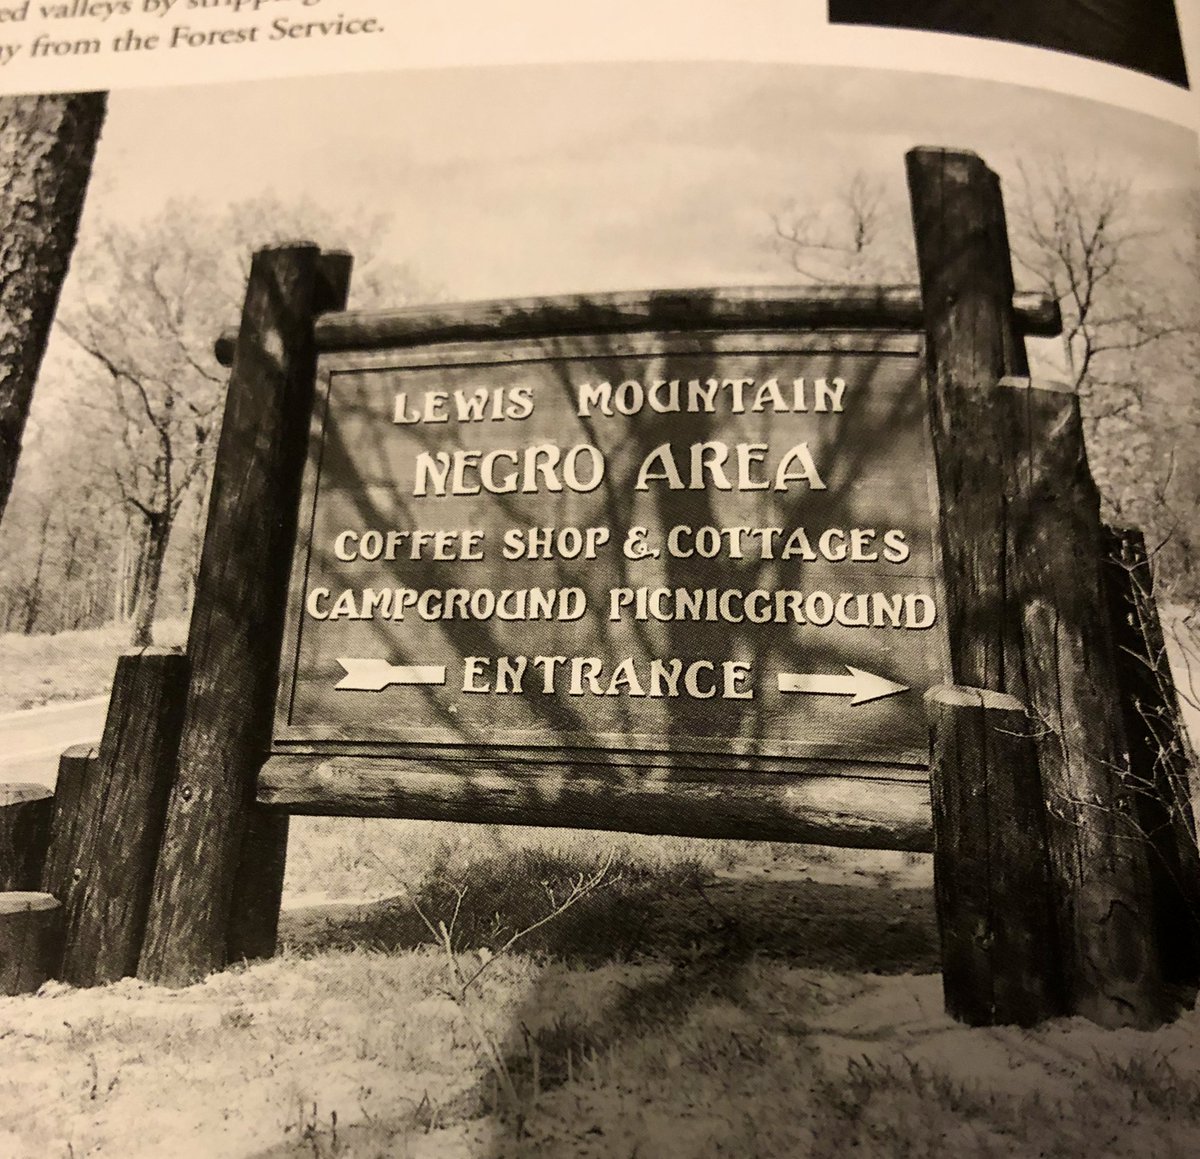 19. One of his first acts was to abolish the Interior Department's segregated lunchrooms. Then he told the national parks in the south to simply ignore the Jim Crow laws requiring separate facilities for blacks. At Virginia's Shenandoah National Park, signs segregating